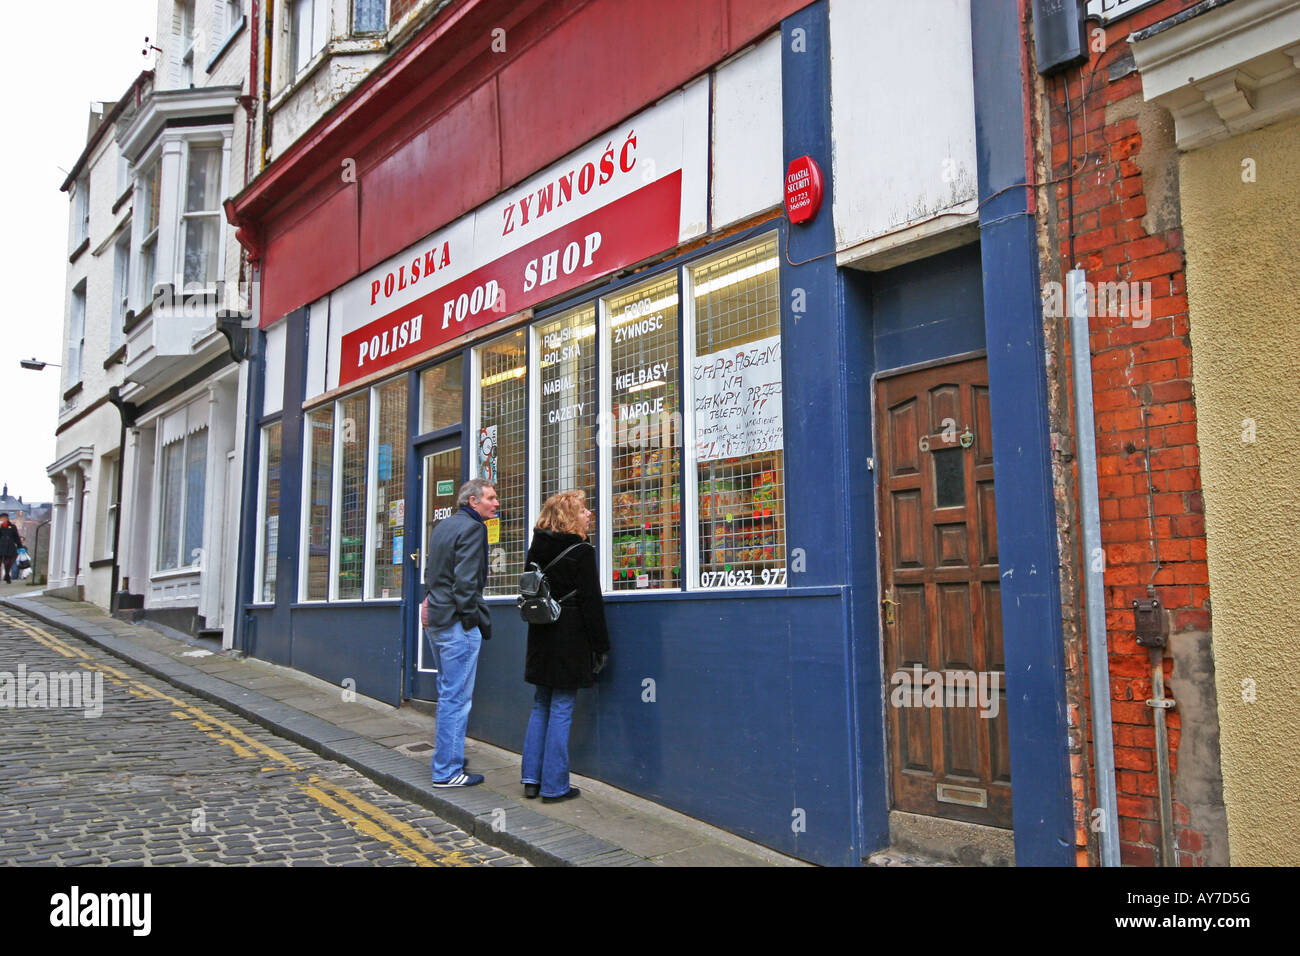 Polish food shop just off the main street in Scarborough. Stock Photo